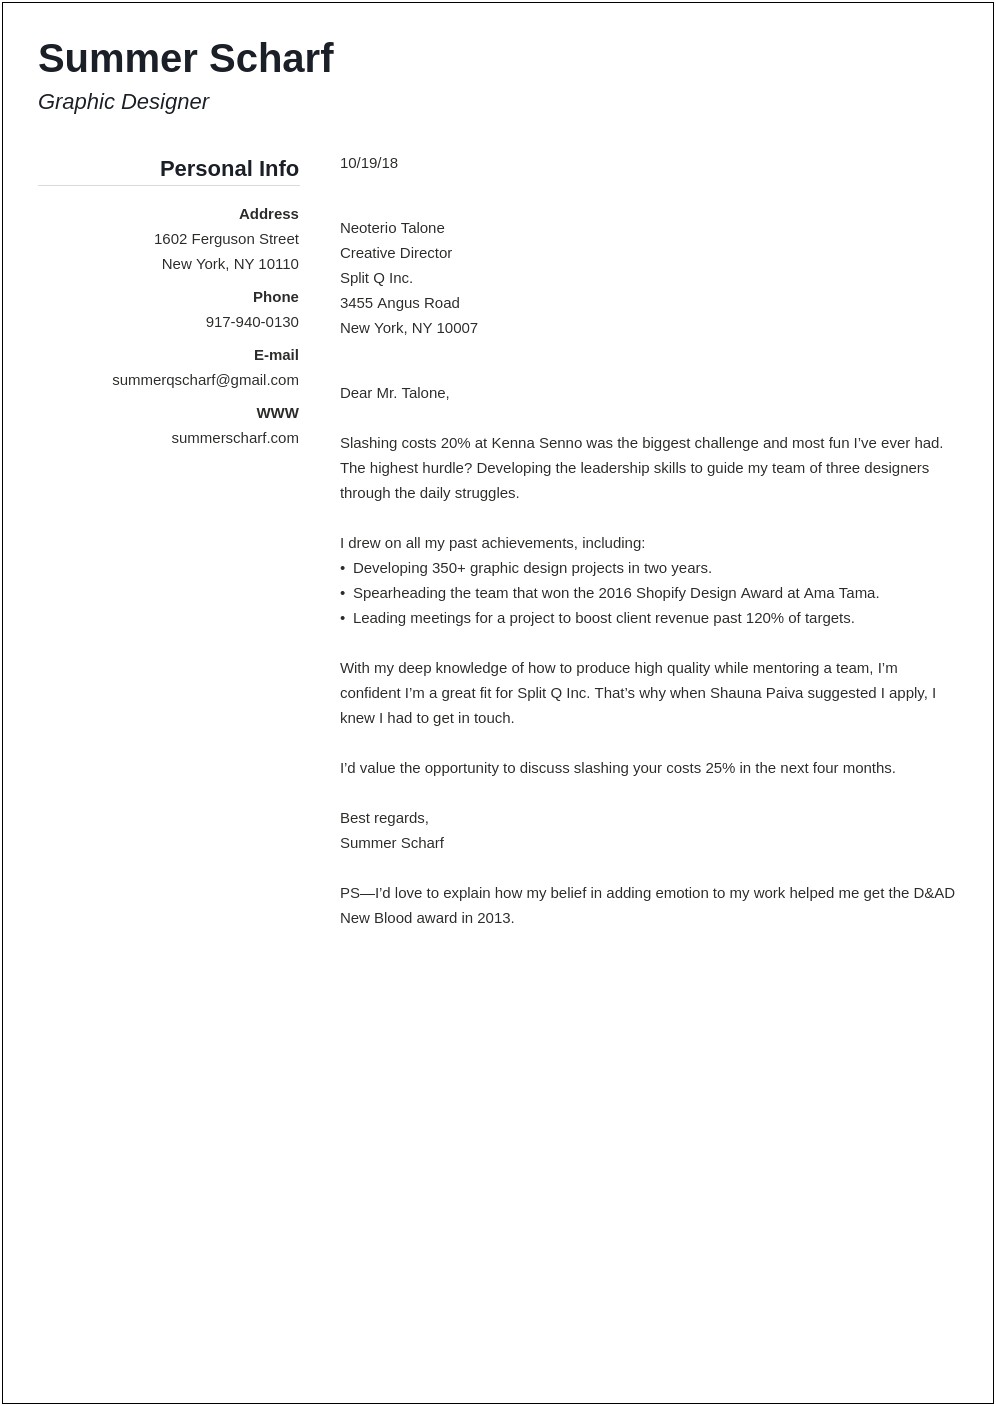 Resume Cover Letter Introductory Paragraph Examples